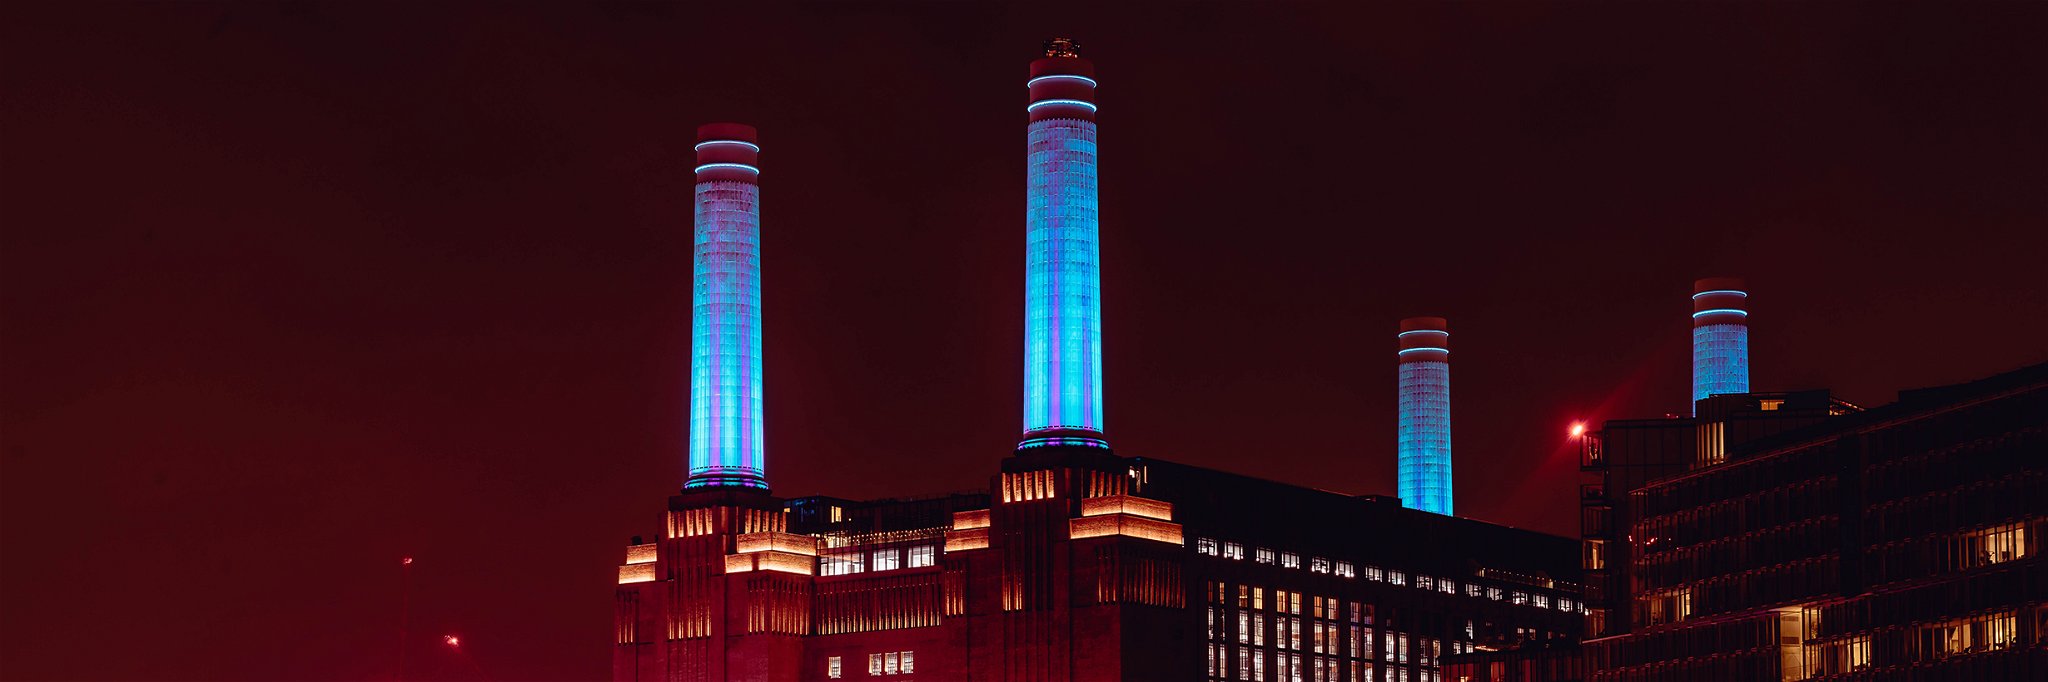 Glide, a new ice rink at Battersea Power Station.